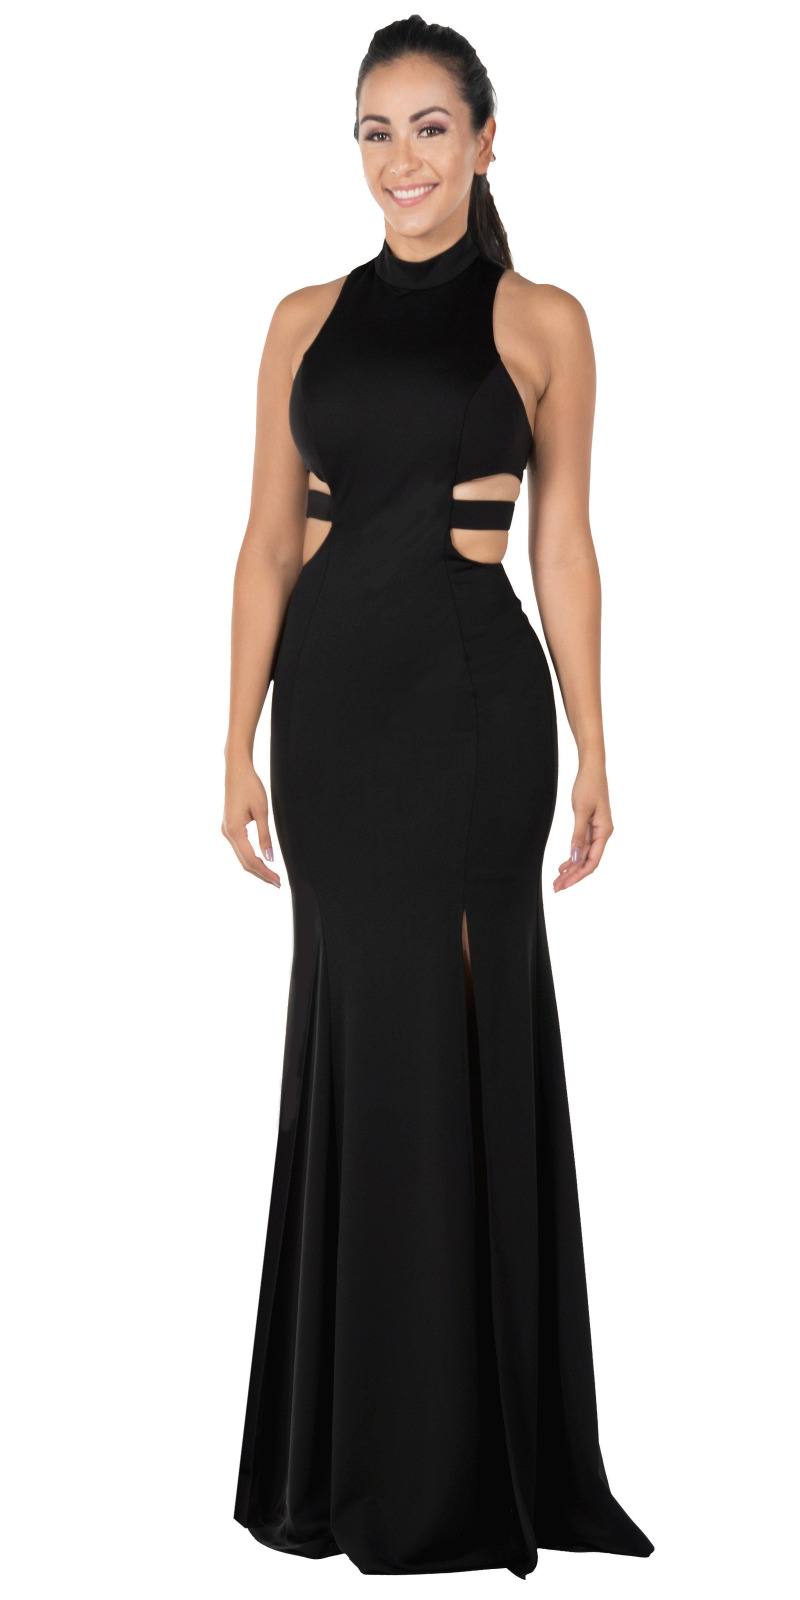 Black Racer Back Long Prom Dress with Side Cut-Outs